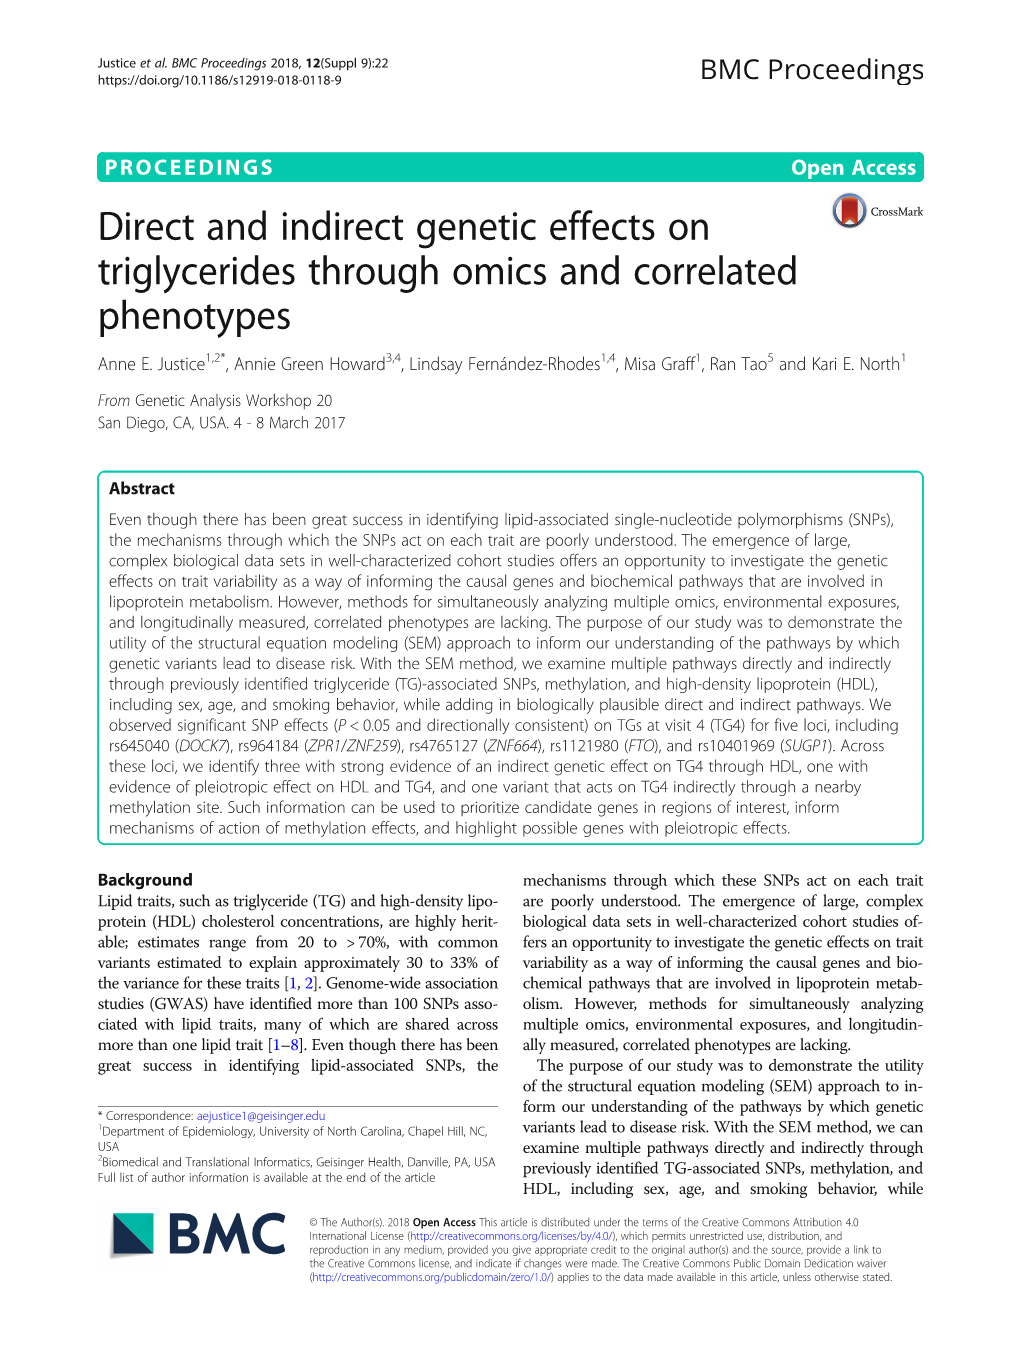 Direct and Indirect Genetic Effects on Triglycerides Through Omics and Correlated Phenotypes Anne E